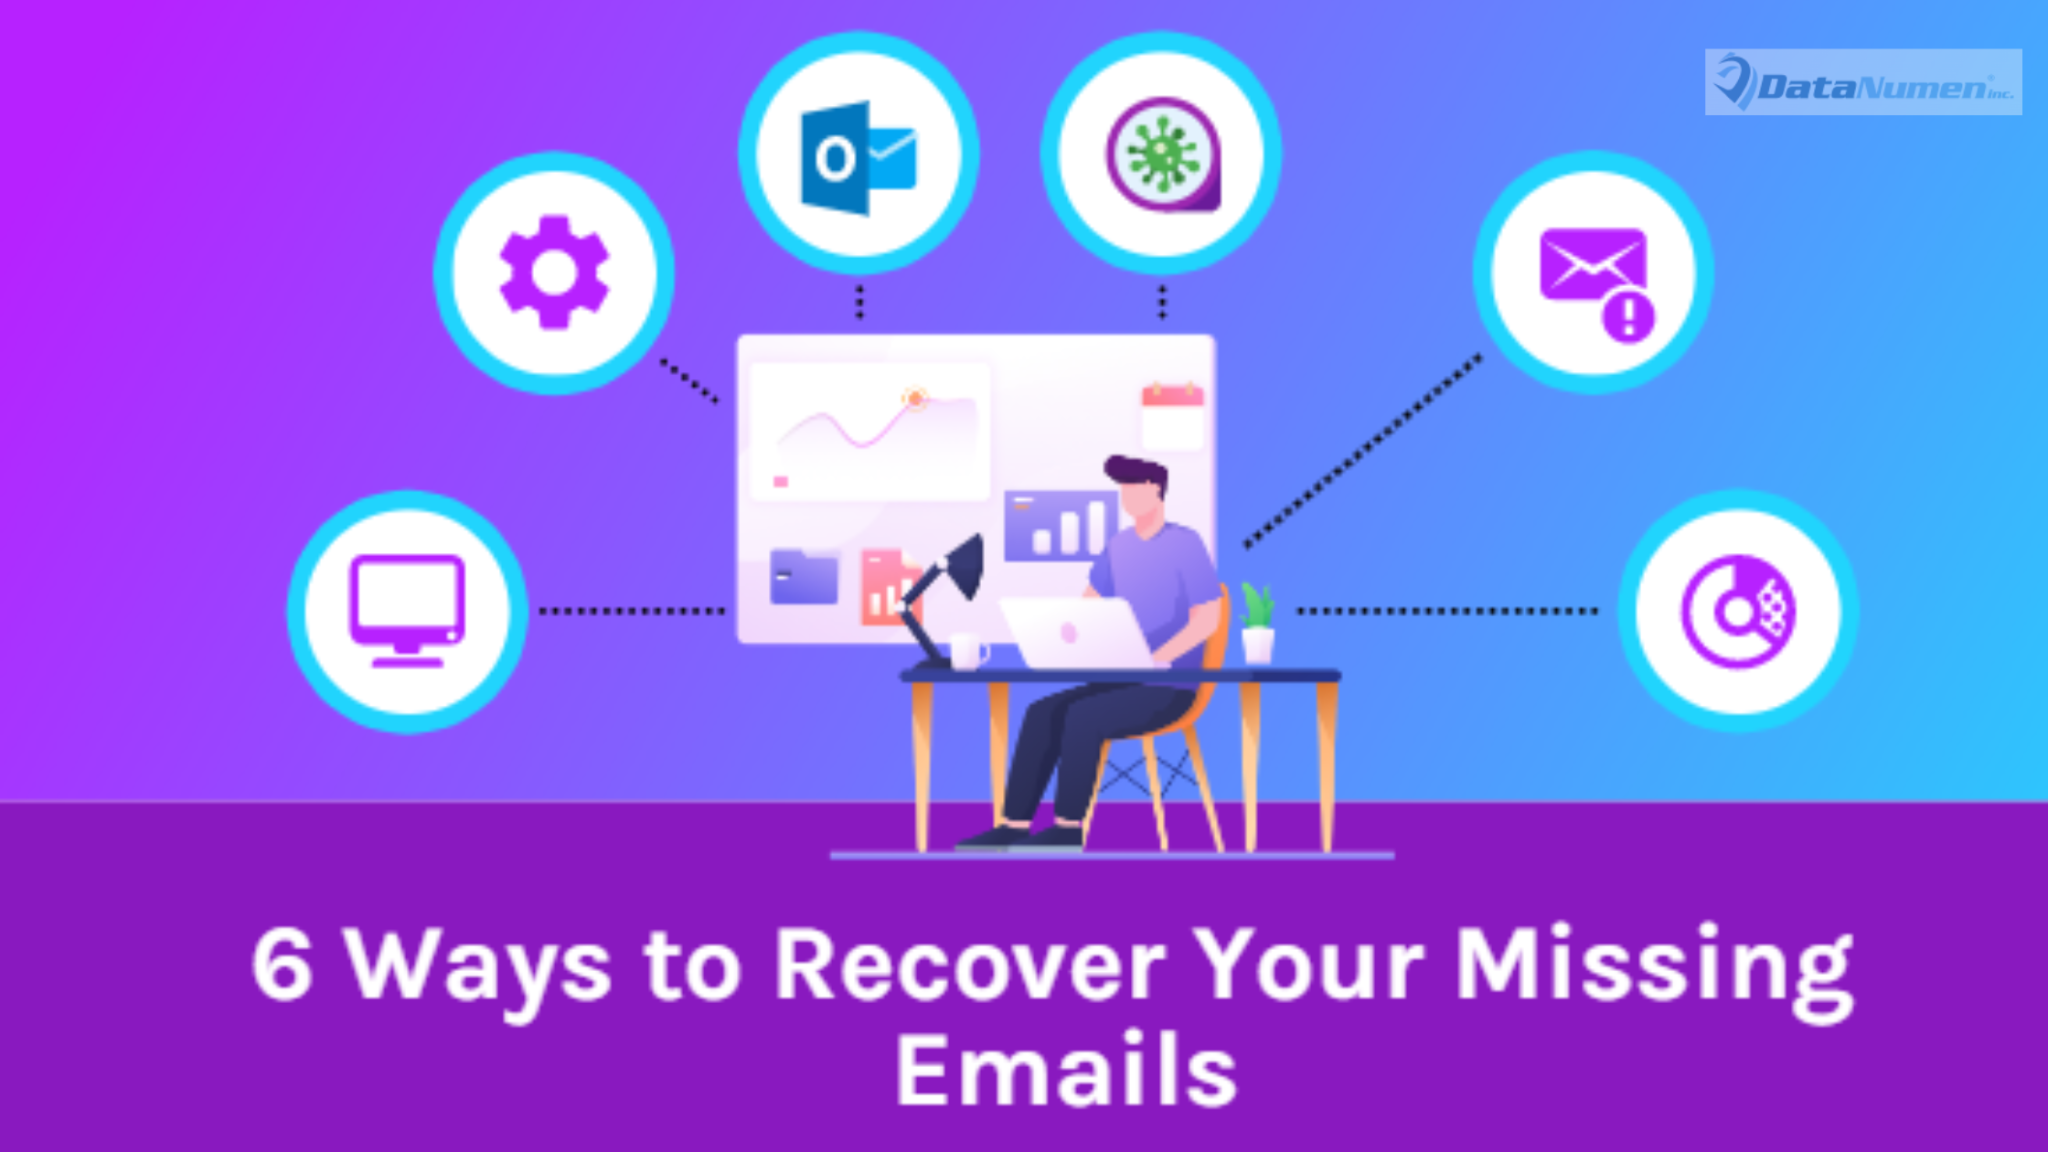 6 Easy Ways to Recover Emails in Outlook